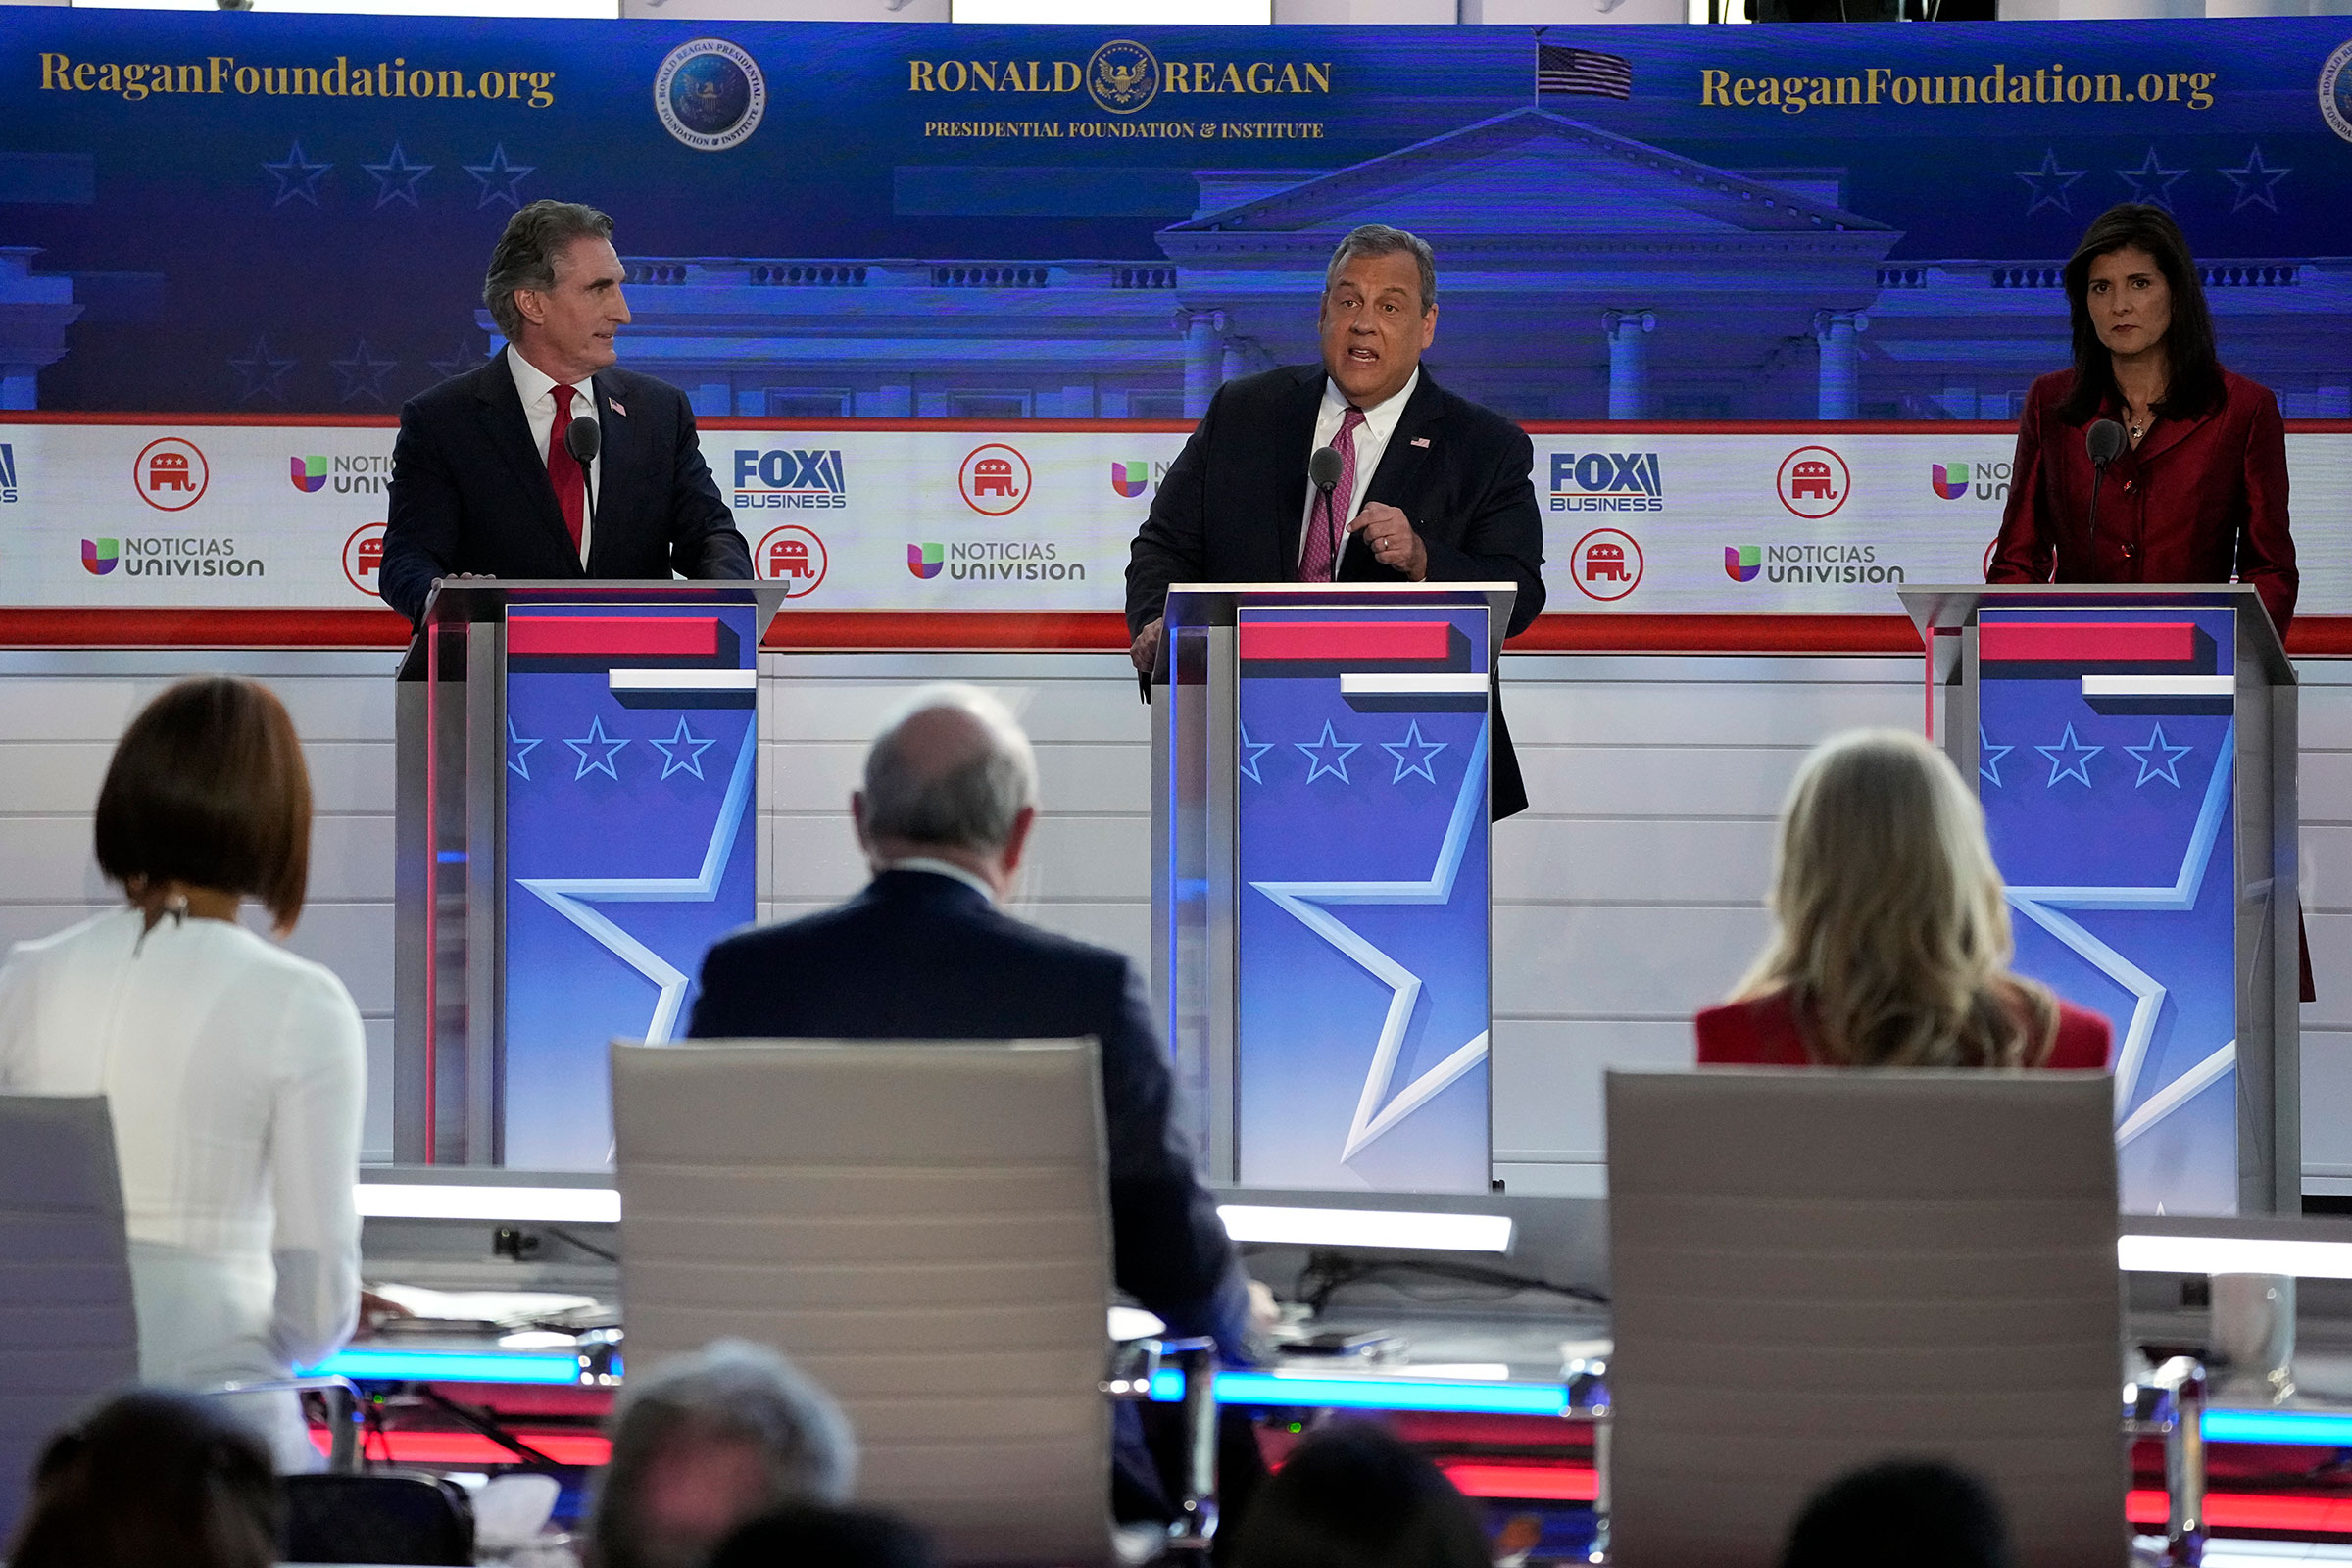 Former New Jersey Gov. Chris Christie, center, argues a point during a Republican presidential primary debate hosted by FOX Business Network and Univision on Wednesday at the Ronald Reagan Presidential Library.